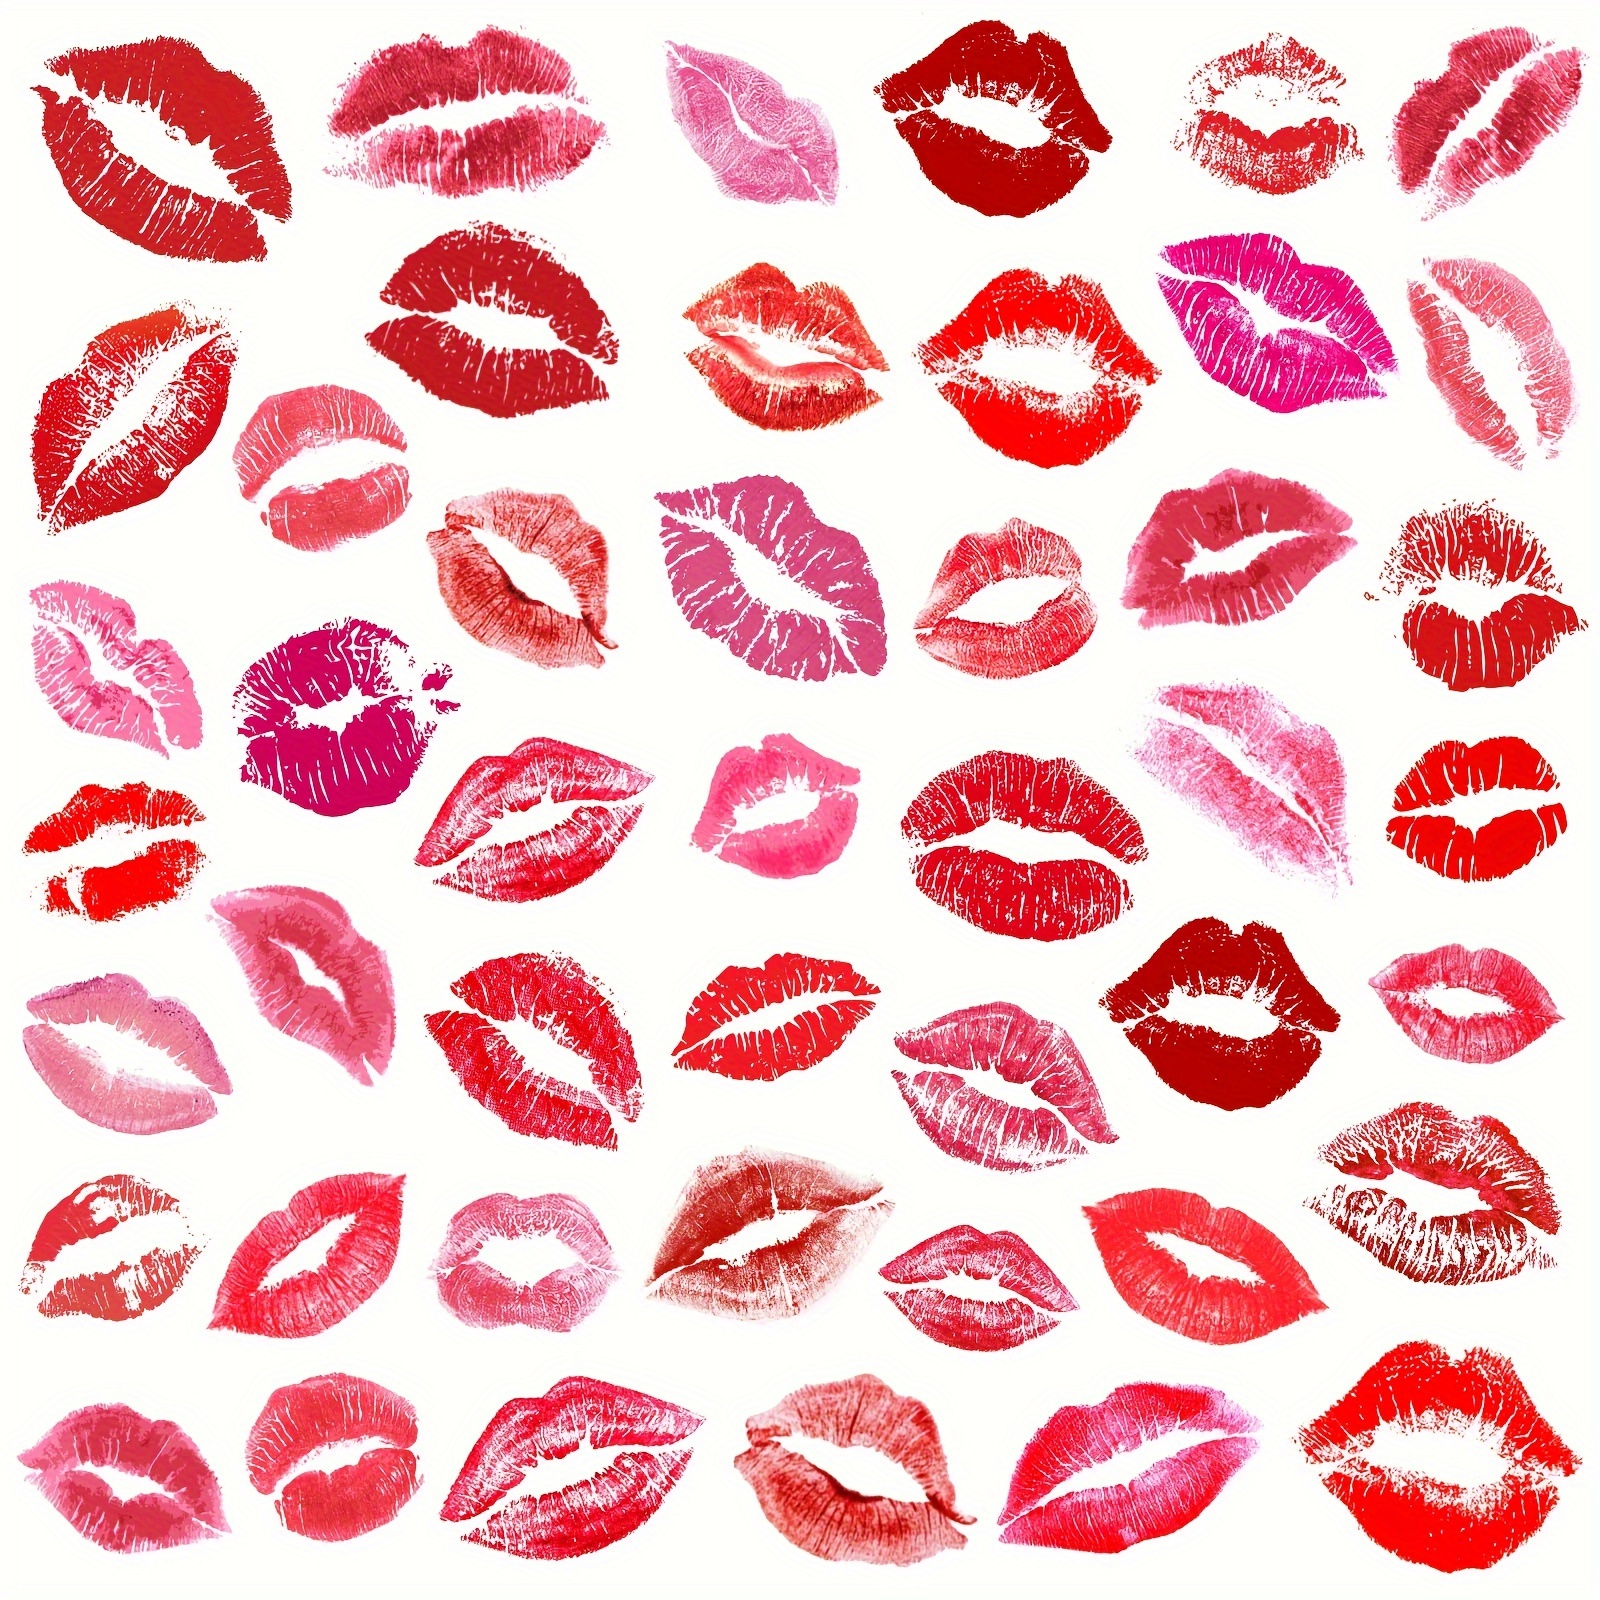 

2 Sheets (40 Styles) Lip Print Tattoo Stickers, Valentine's Day Party, Bachelorette Party, Pink Theme Party, Boys Girls Party Decorations (gift)